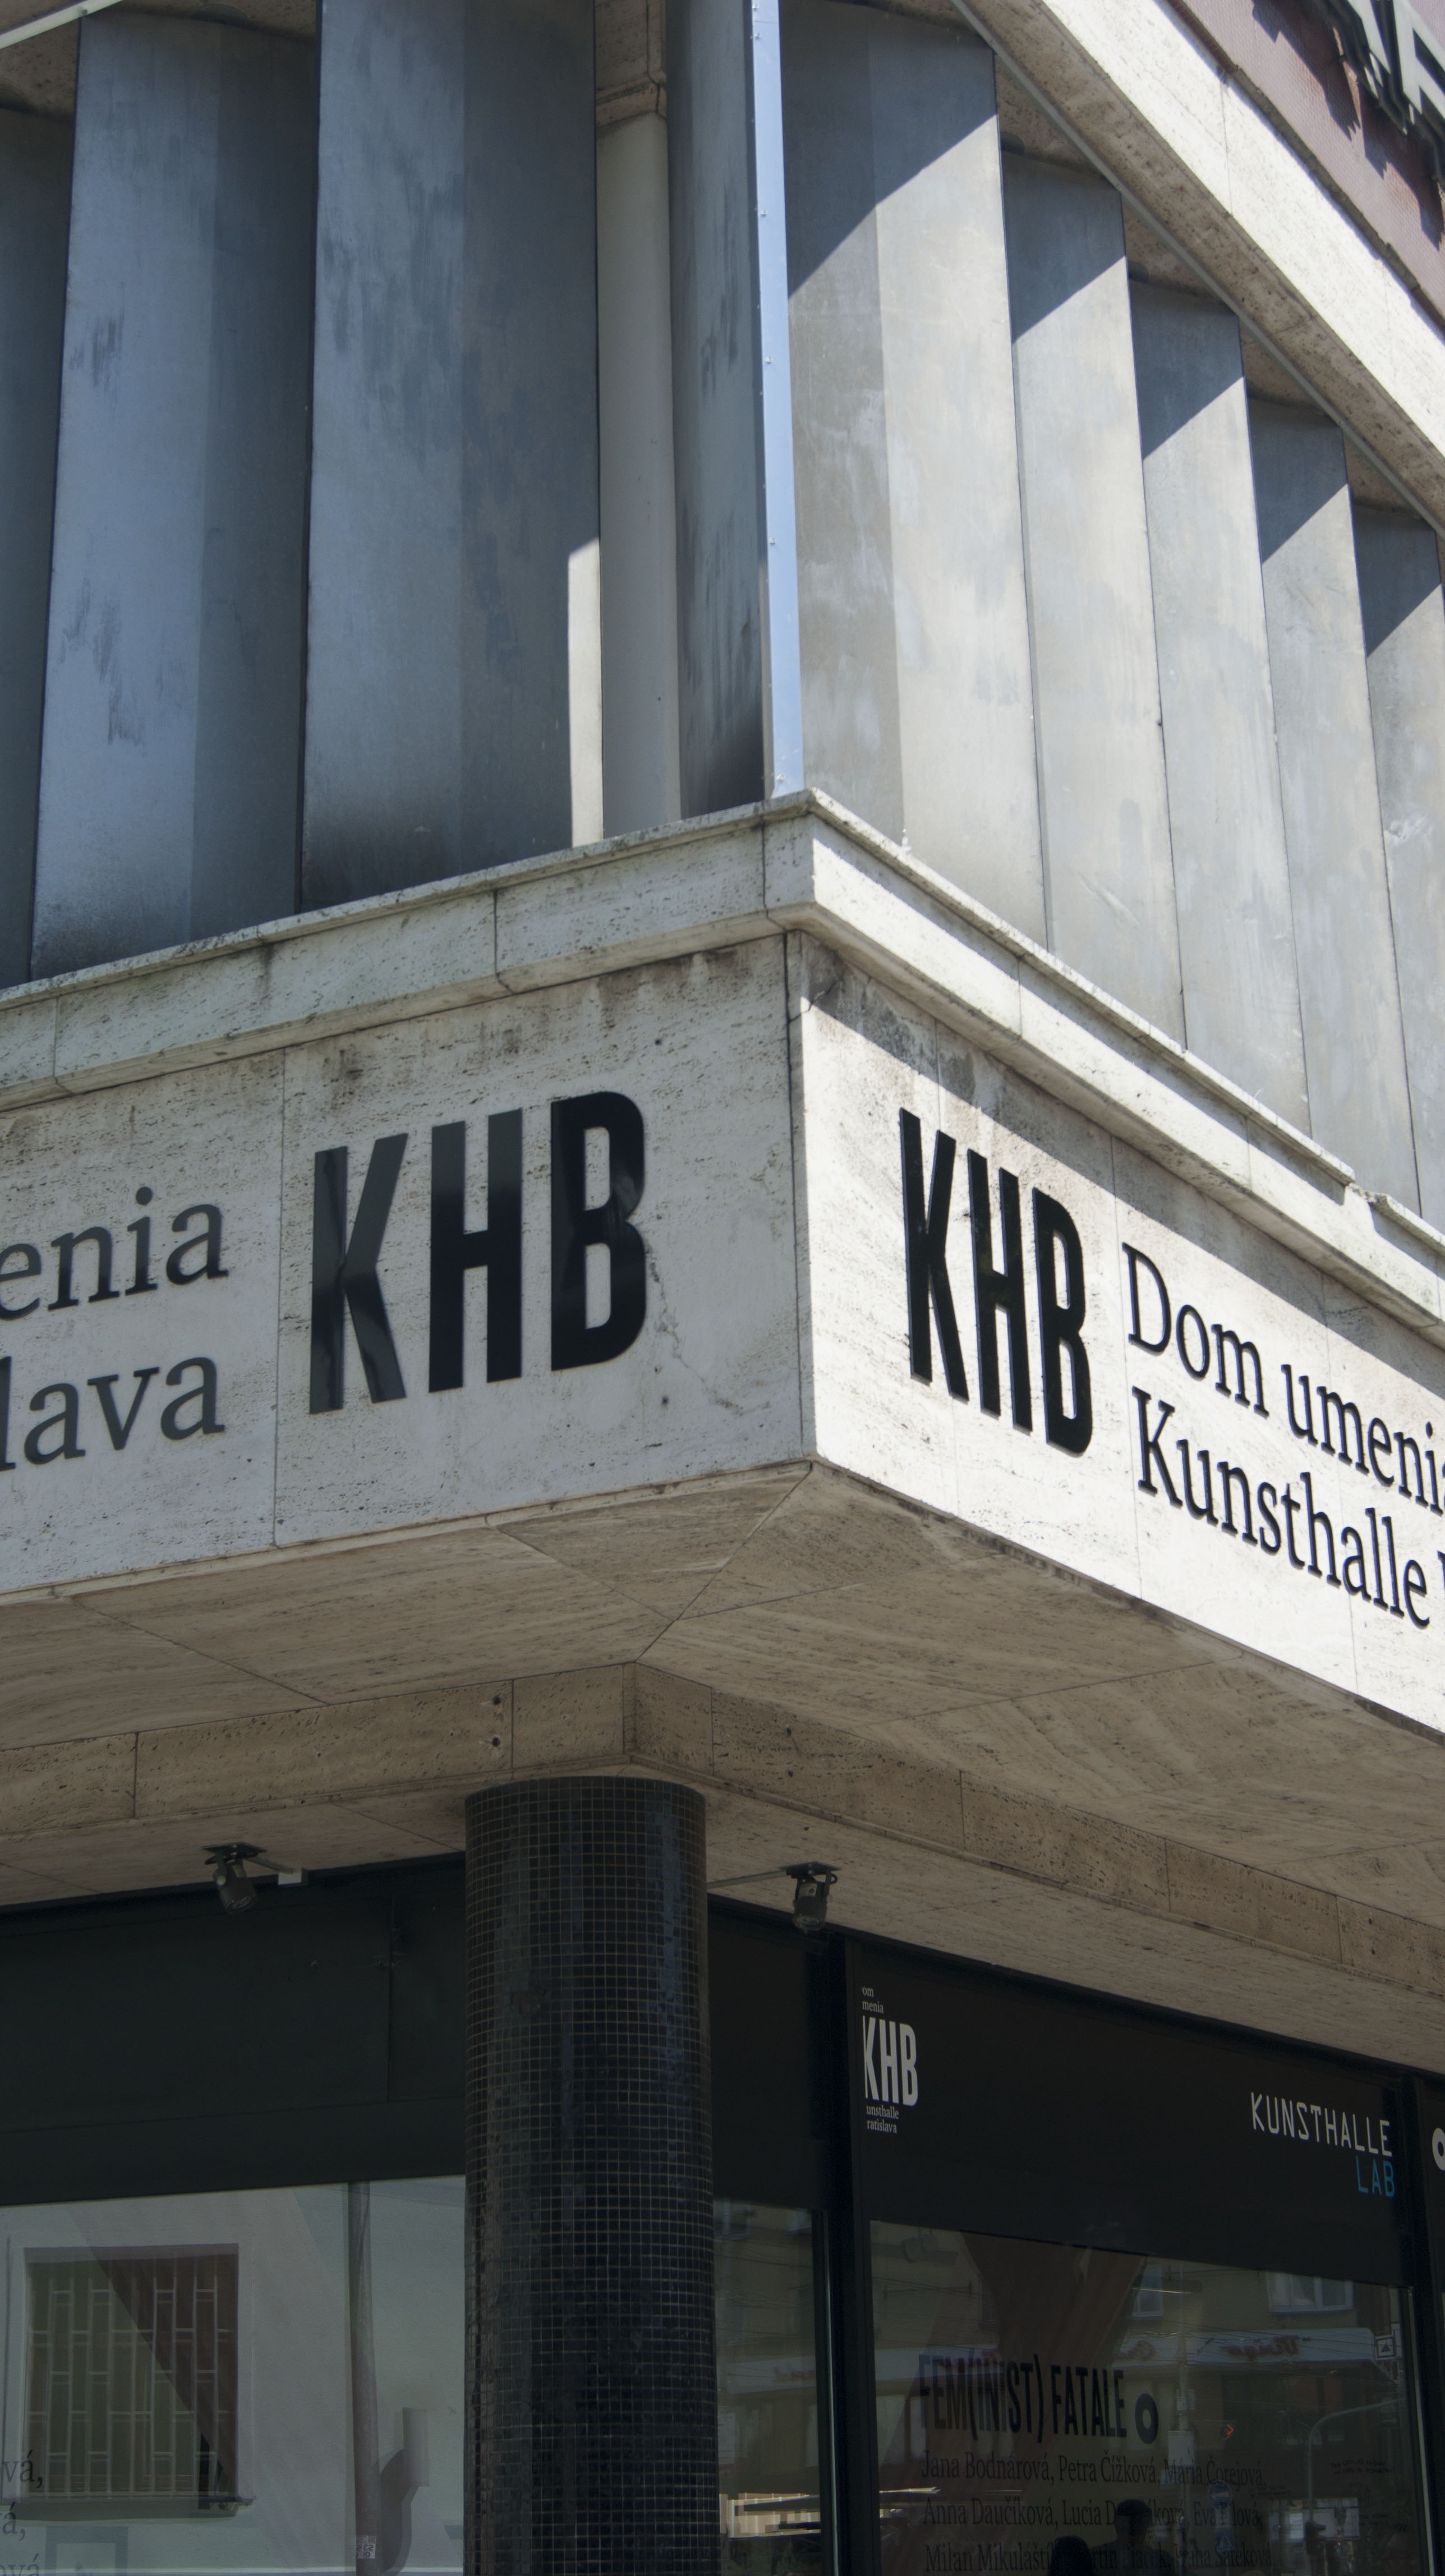 khb dom kunsthalle wall sign